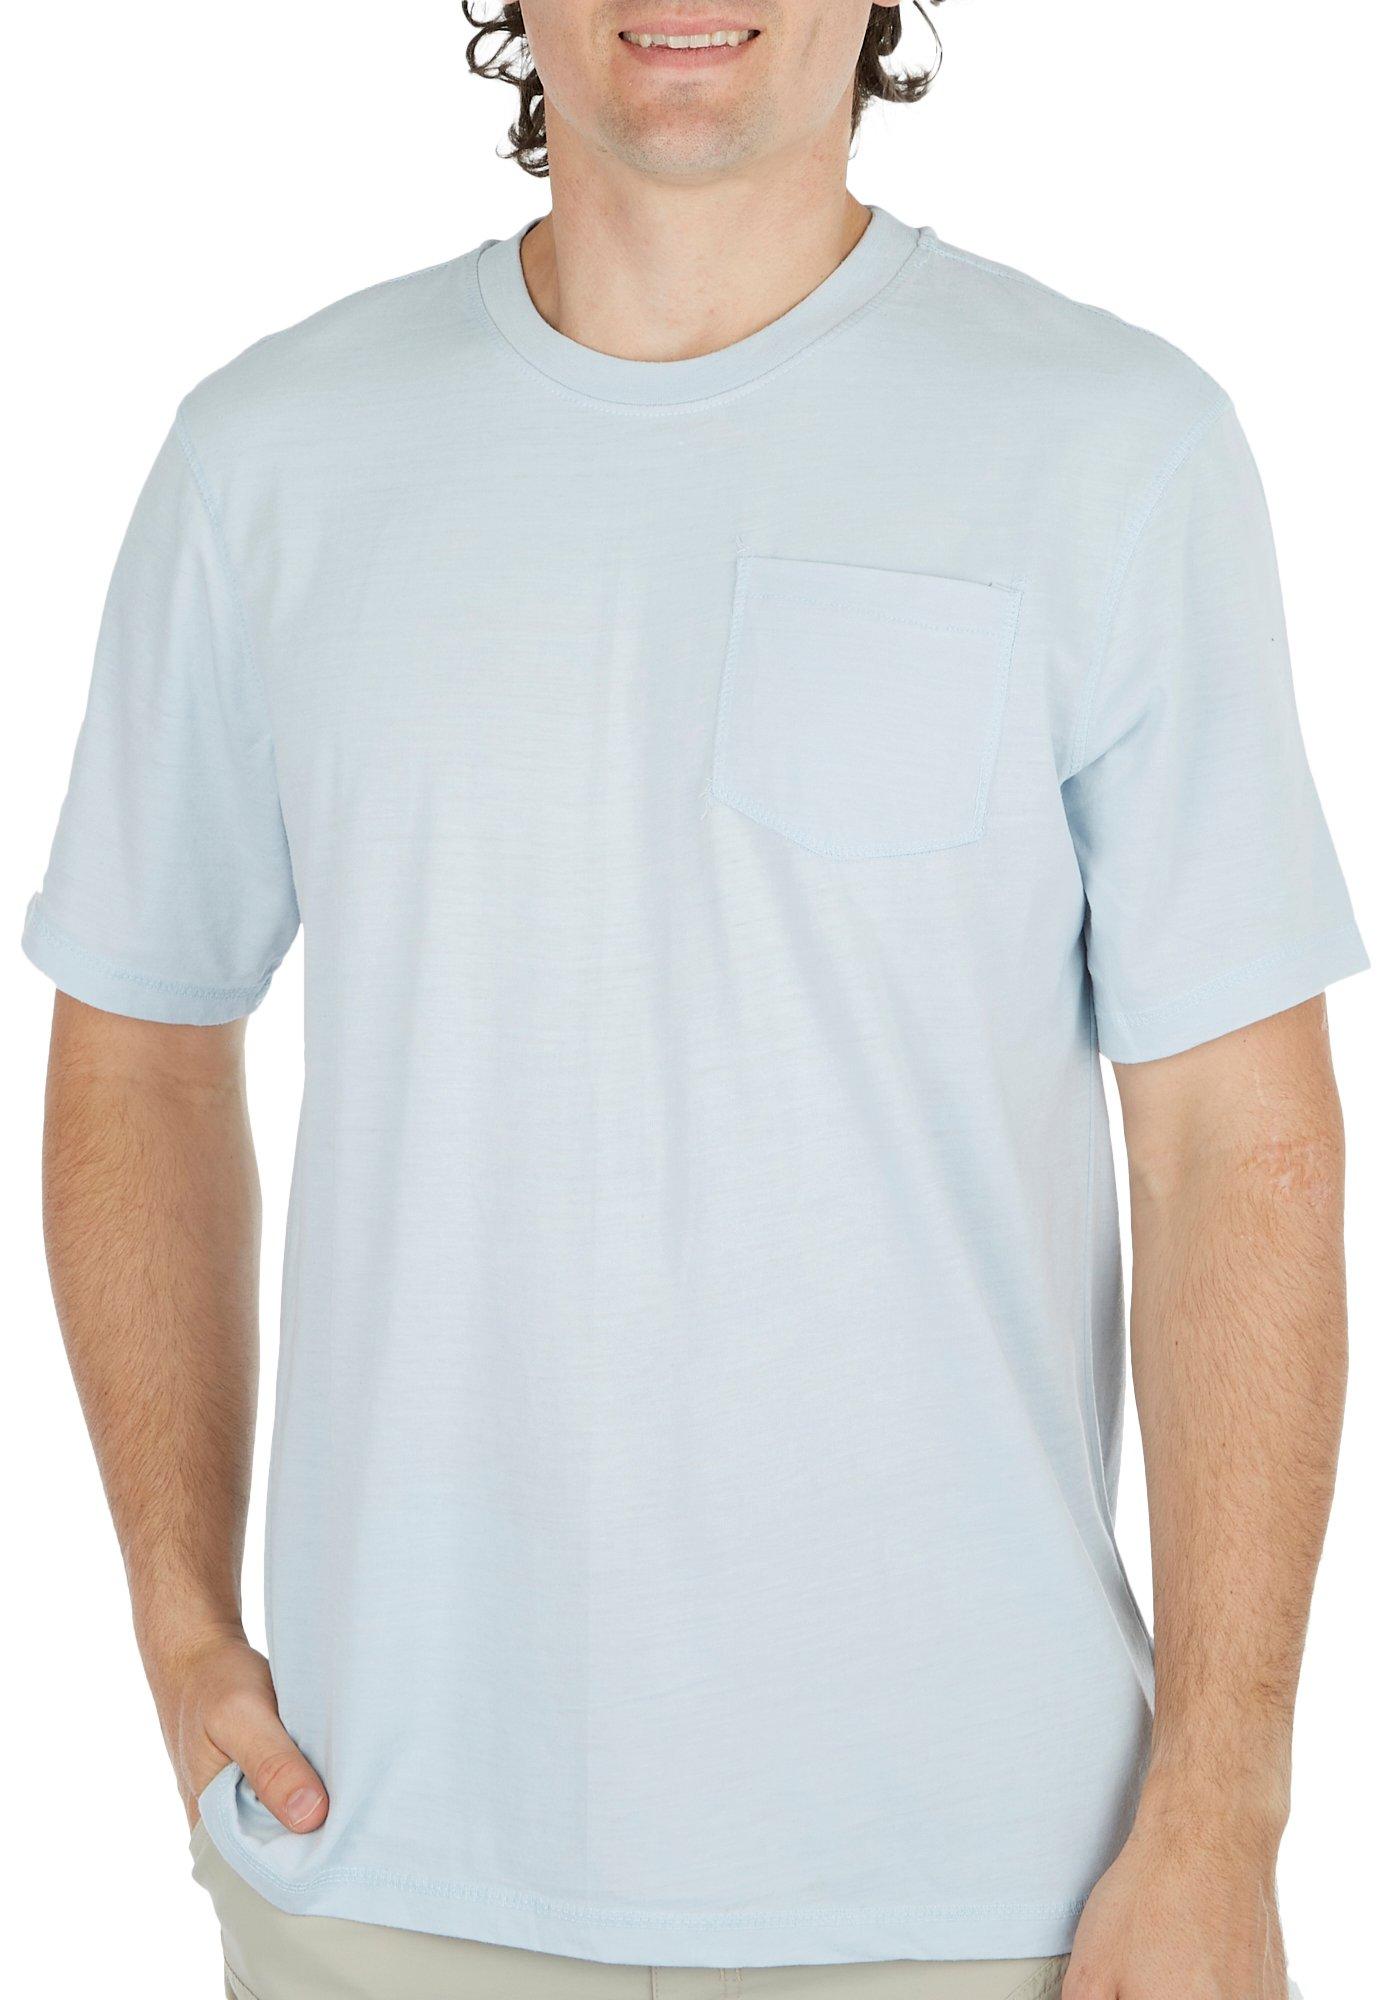 Visitor Mens Solid Everyday Chest Pocket T-Shirt